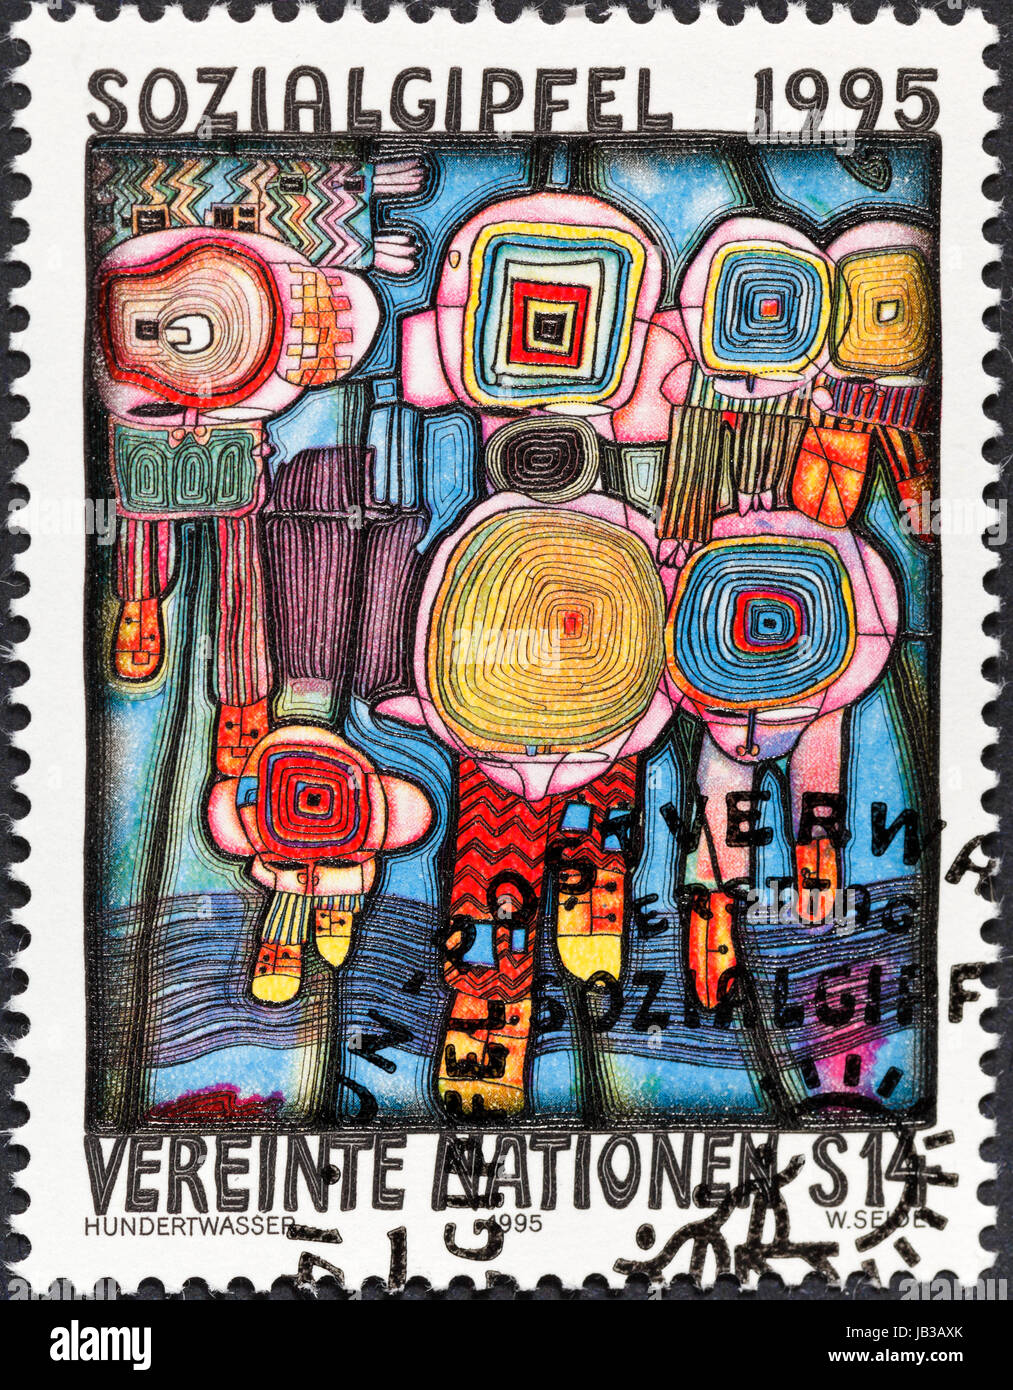 UNITED NATIONS - CIRCA 1995: A postage stamp printed by United Nations organisation for European Summit for Social Development shows Hundertwasser painting Human Rights, circa 1995 Stock Photo